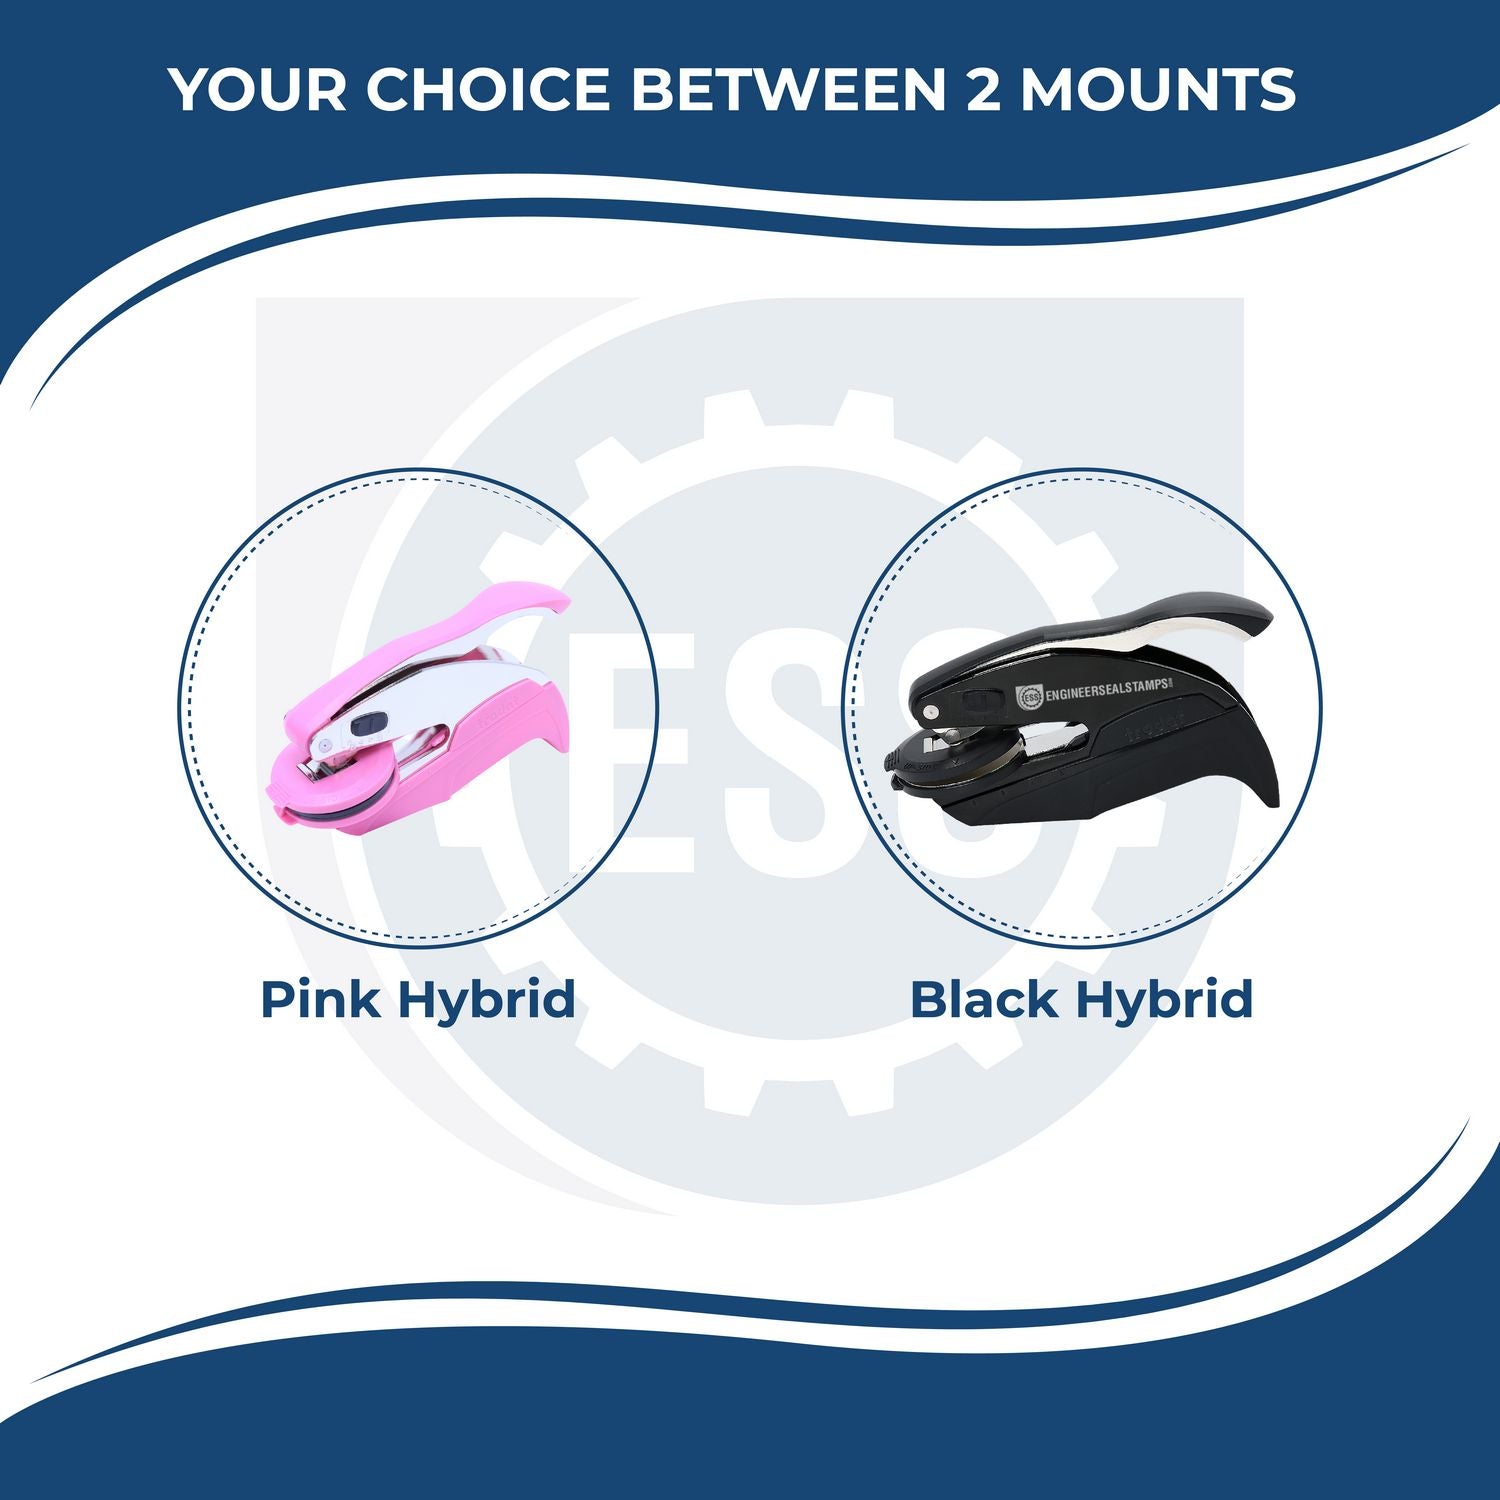 A diagram showing the two-color handle options for the hybrid seal illustrating black or pink